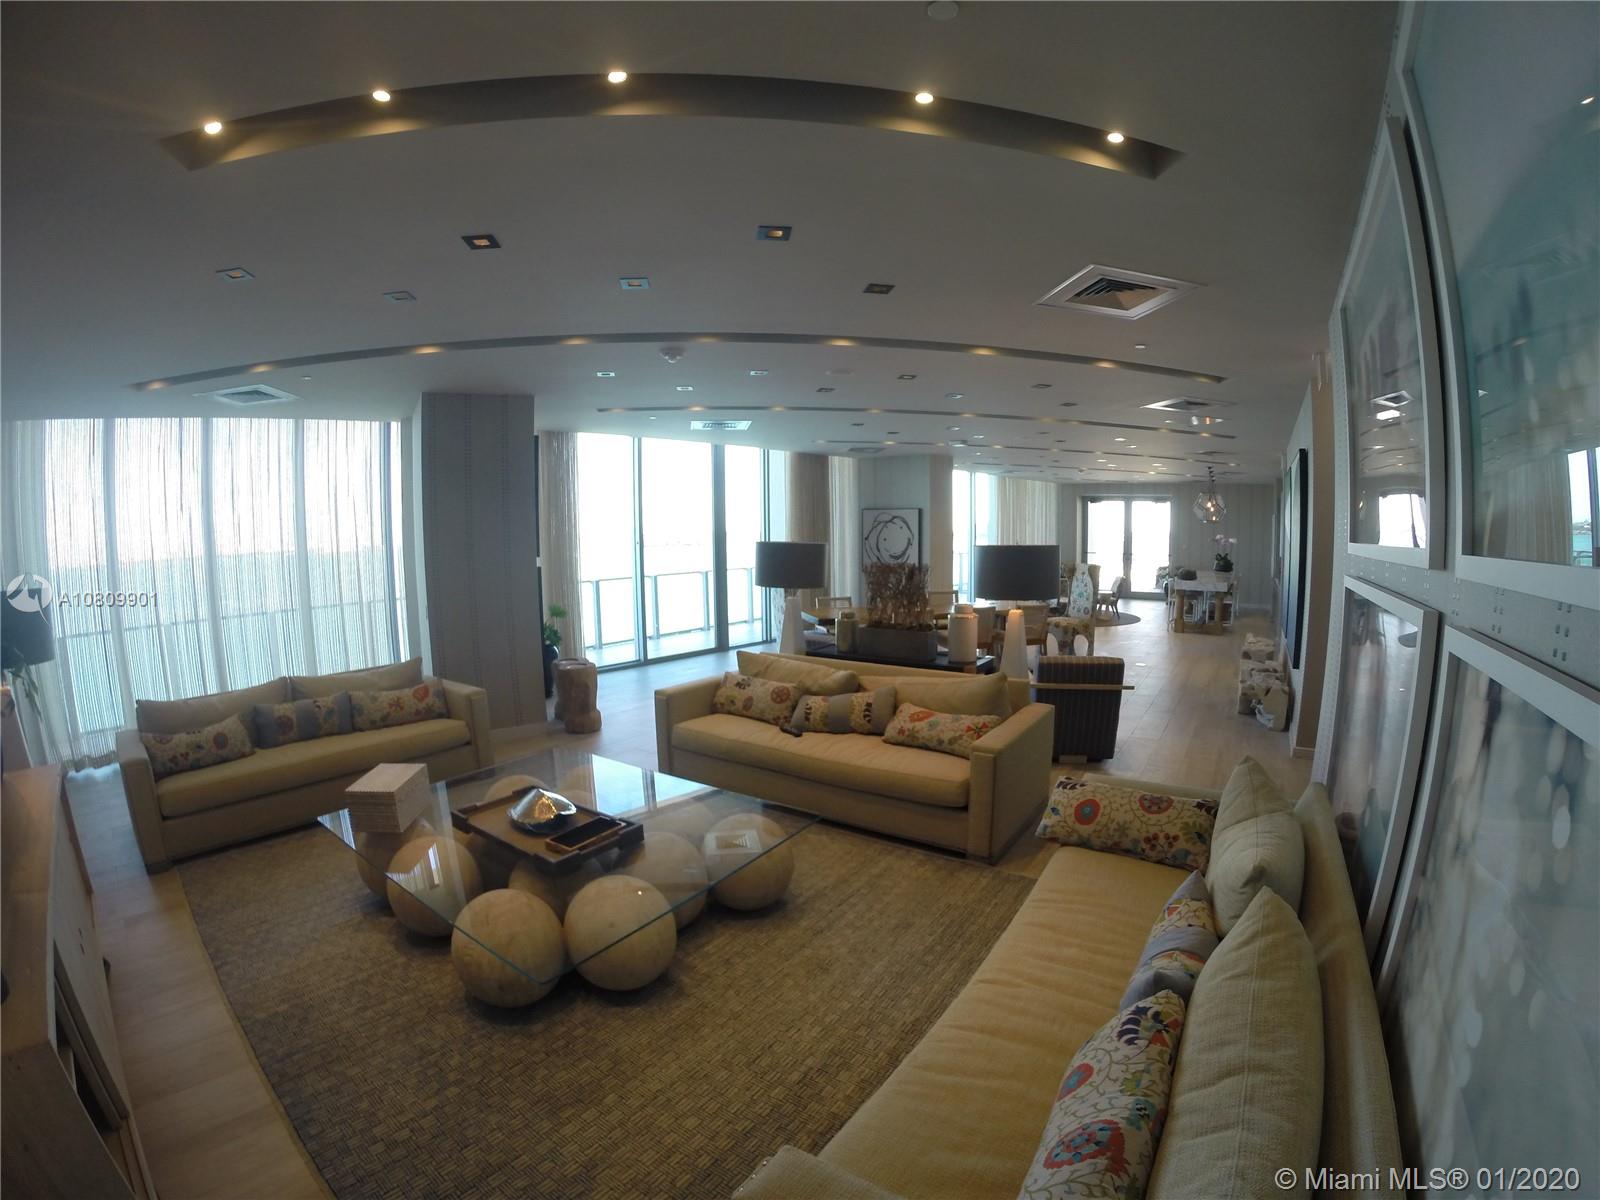 Photo 50 of Biscayne Beach Biscayne Apt UPH-4602 in Miami - MLS A10809901